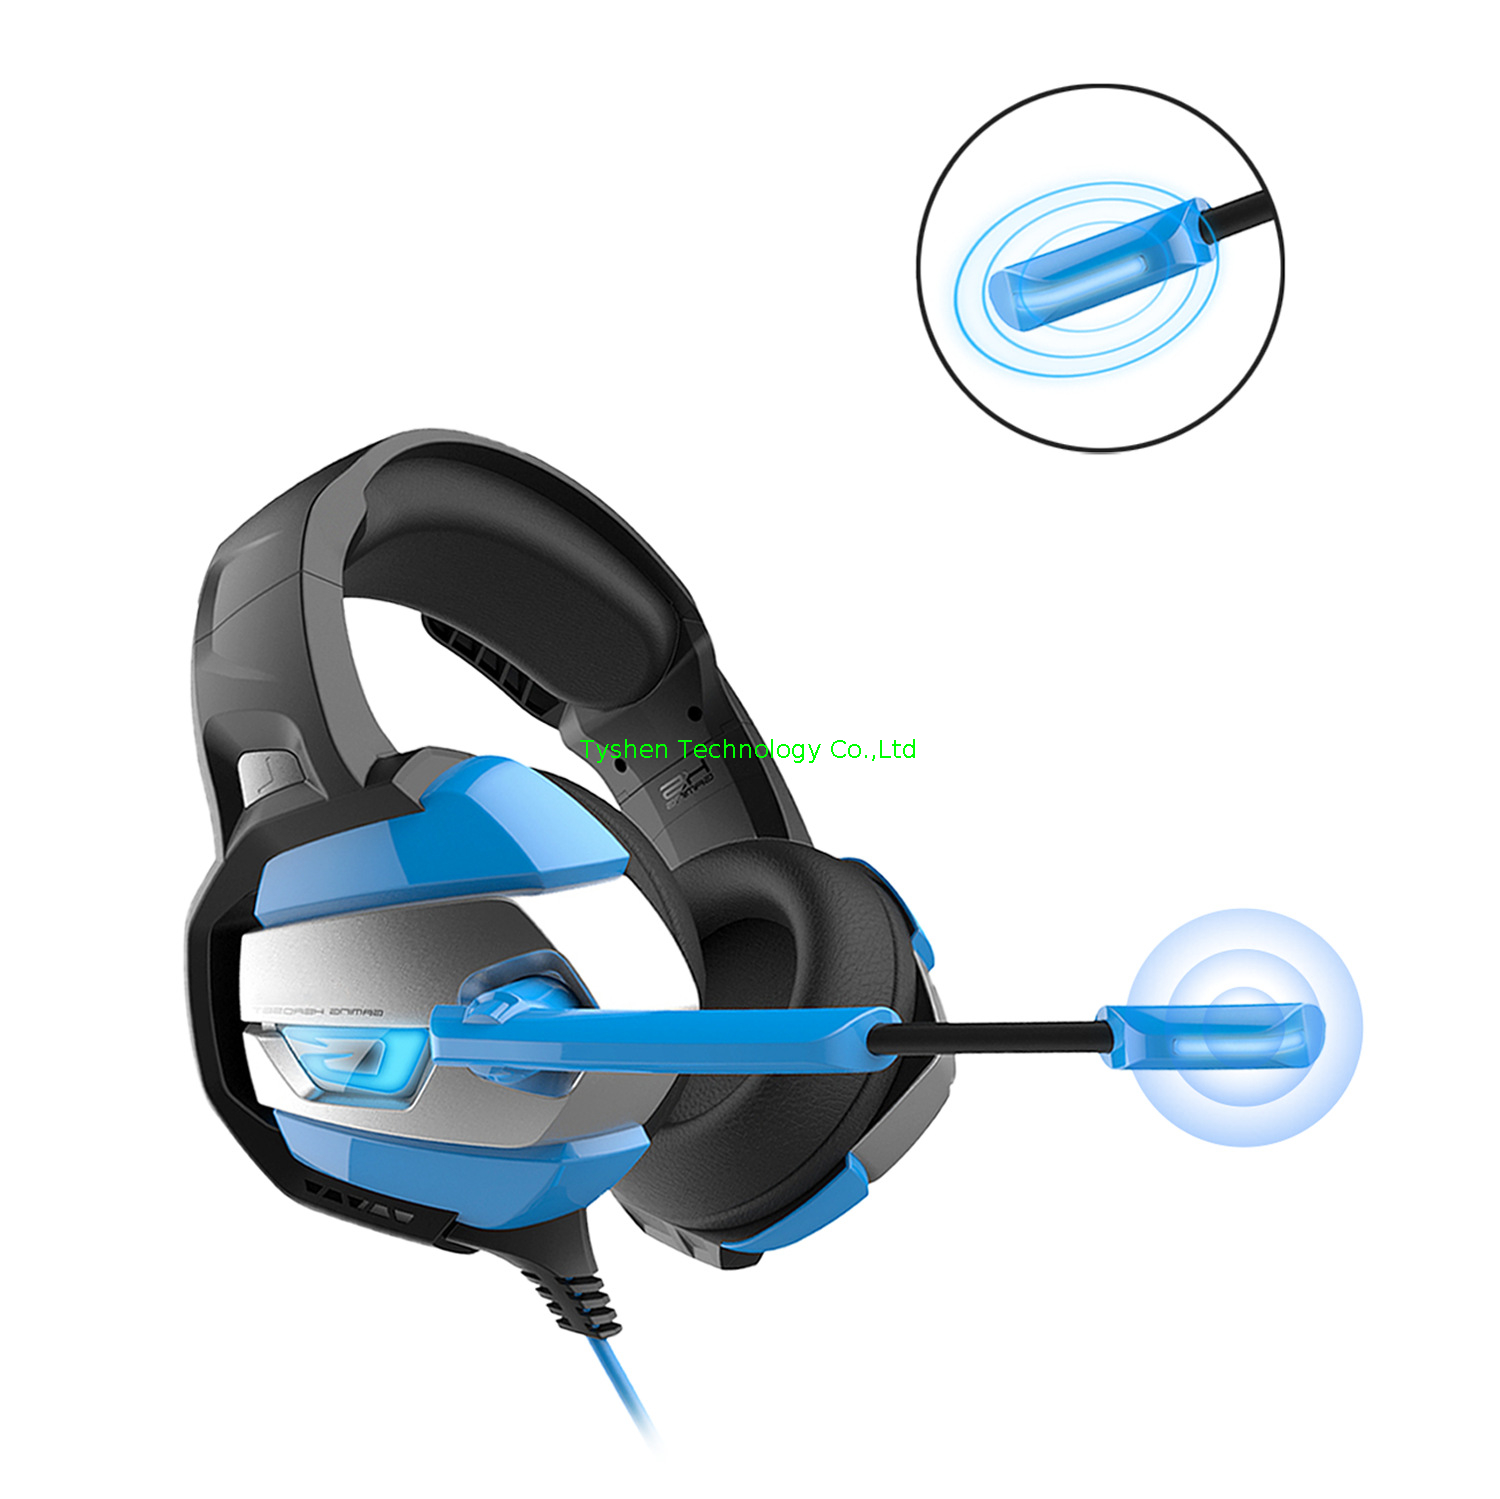 2021 New Model computer headset with USB and 3.5 Audio port ,RGB lighting 